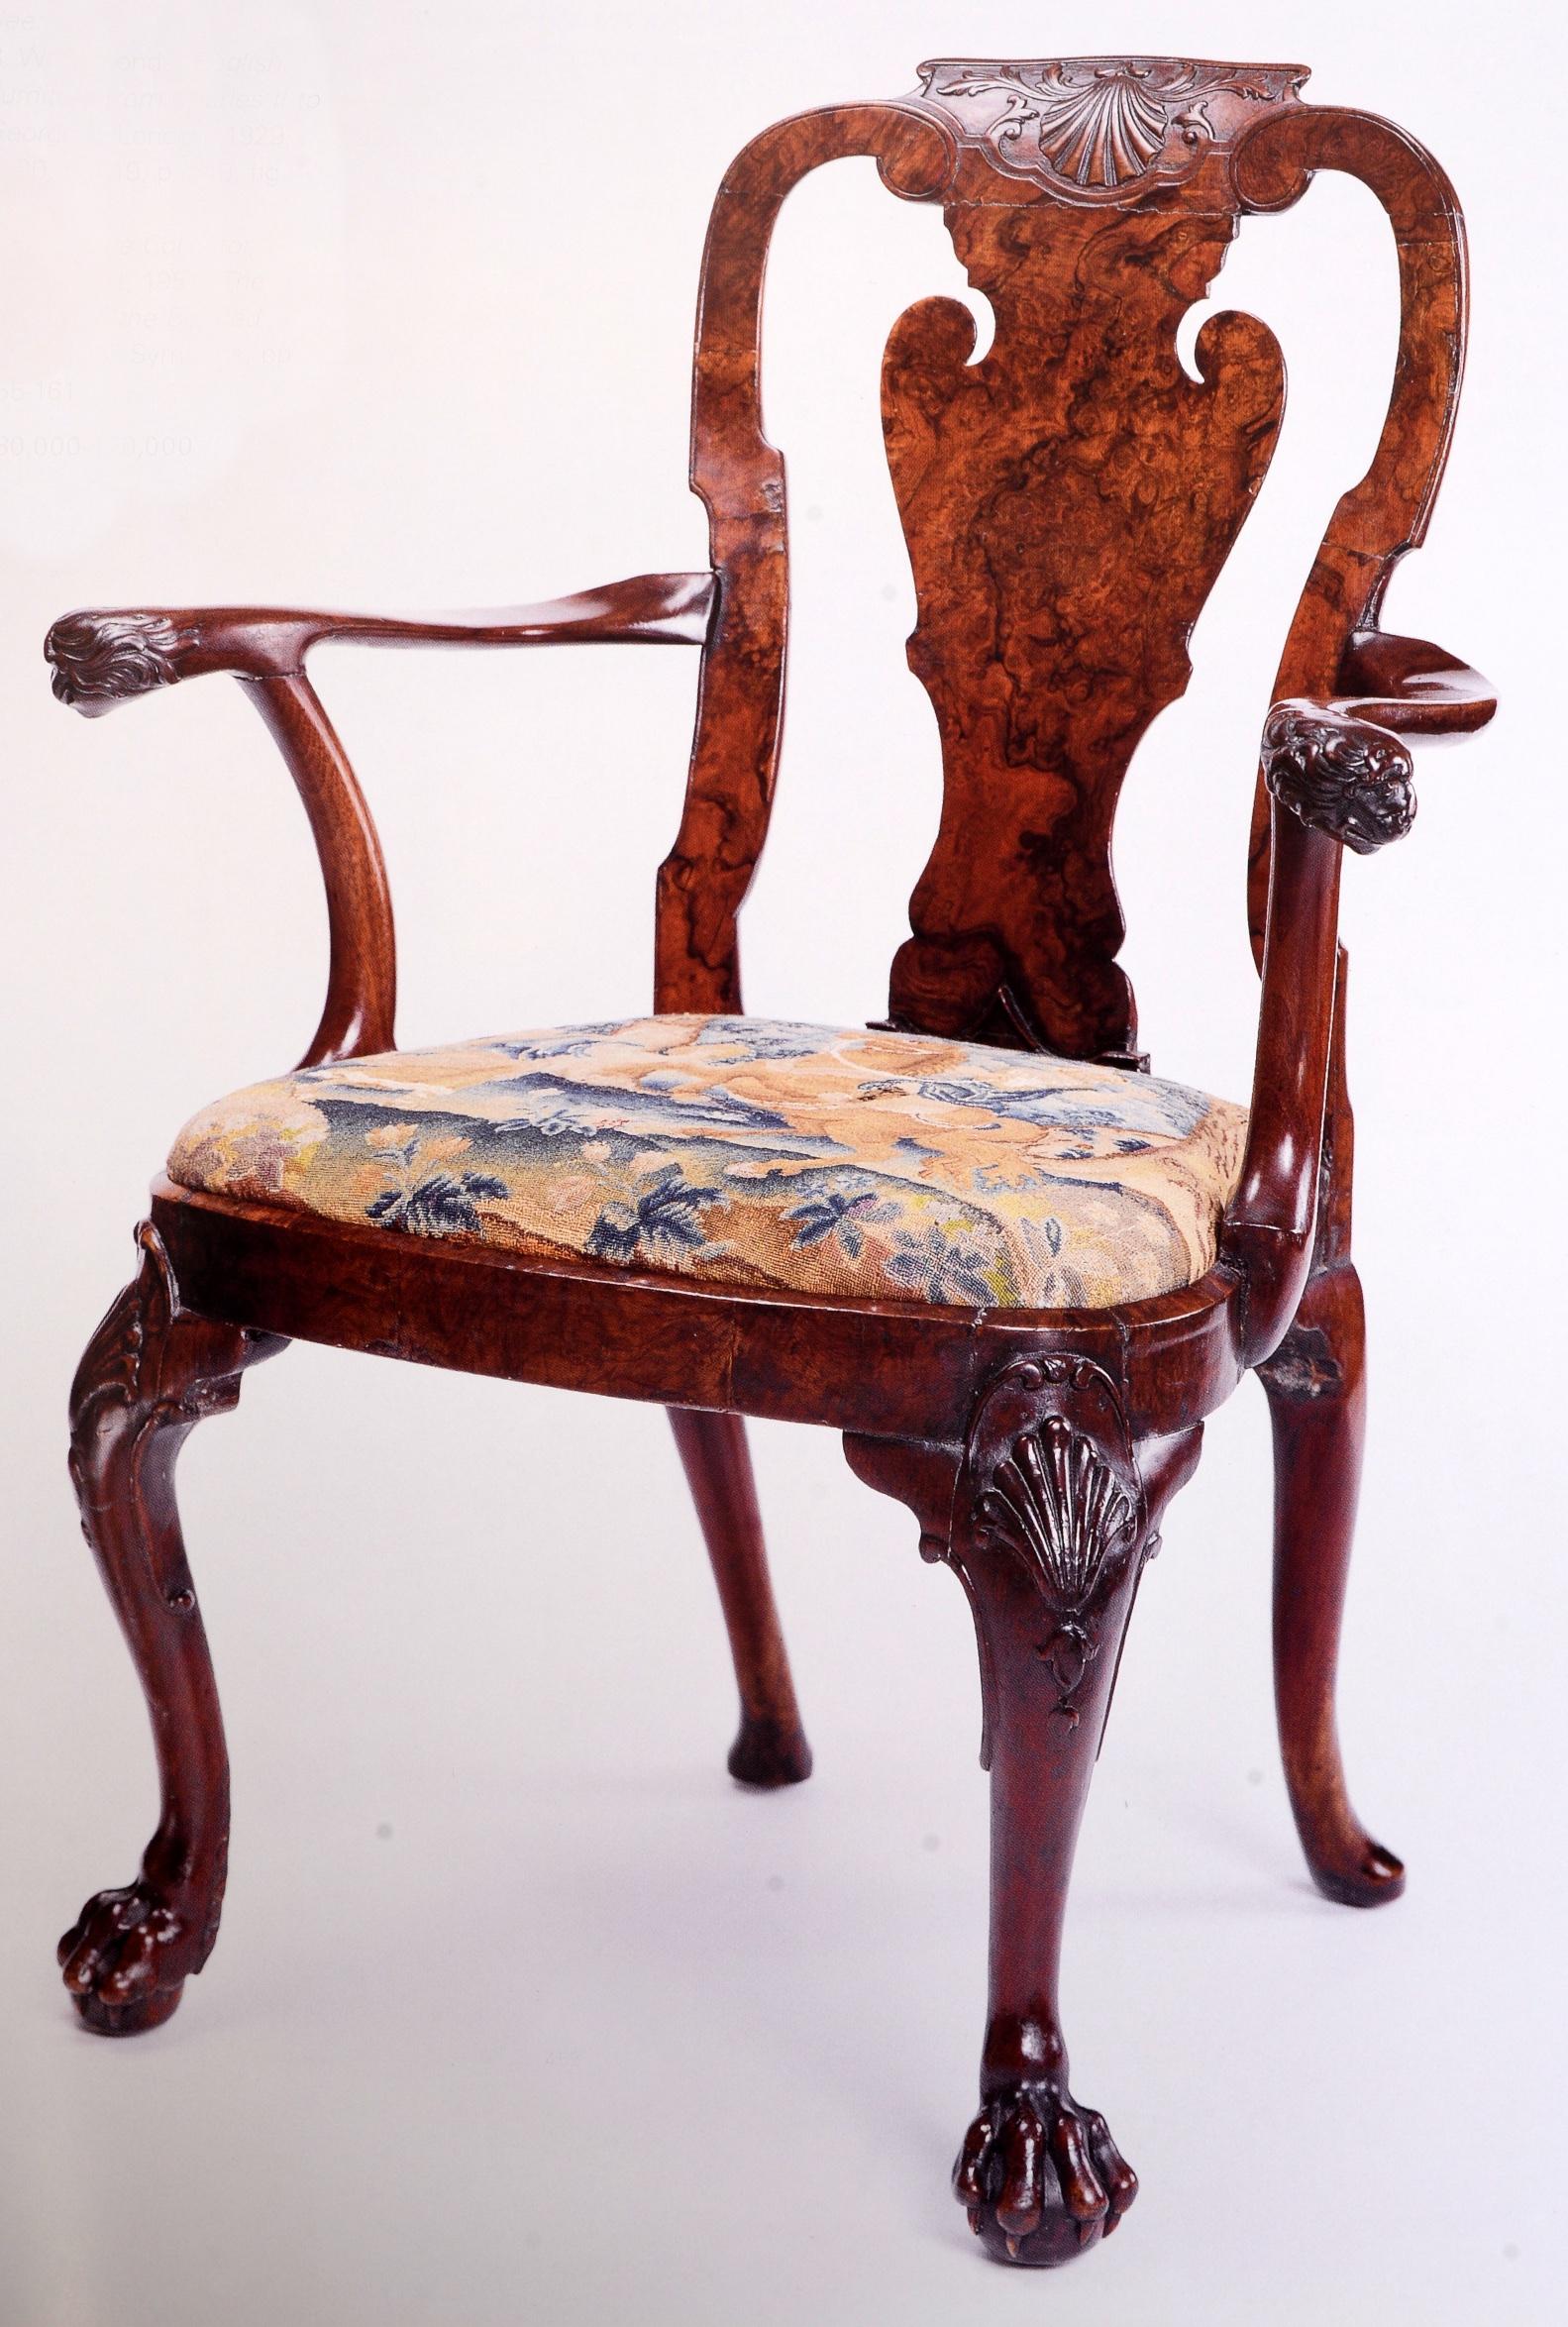 Paper Sotheby's Magnificent English Furniture from the Collection of Theodore Baum For Sale